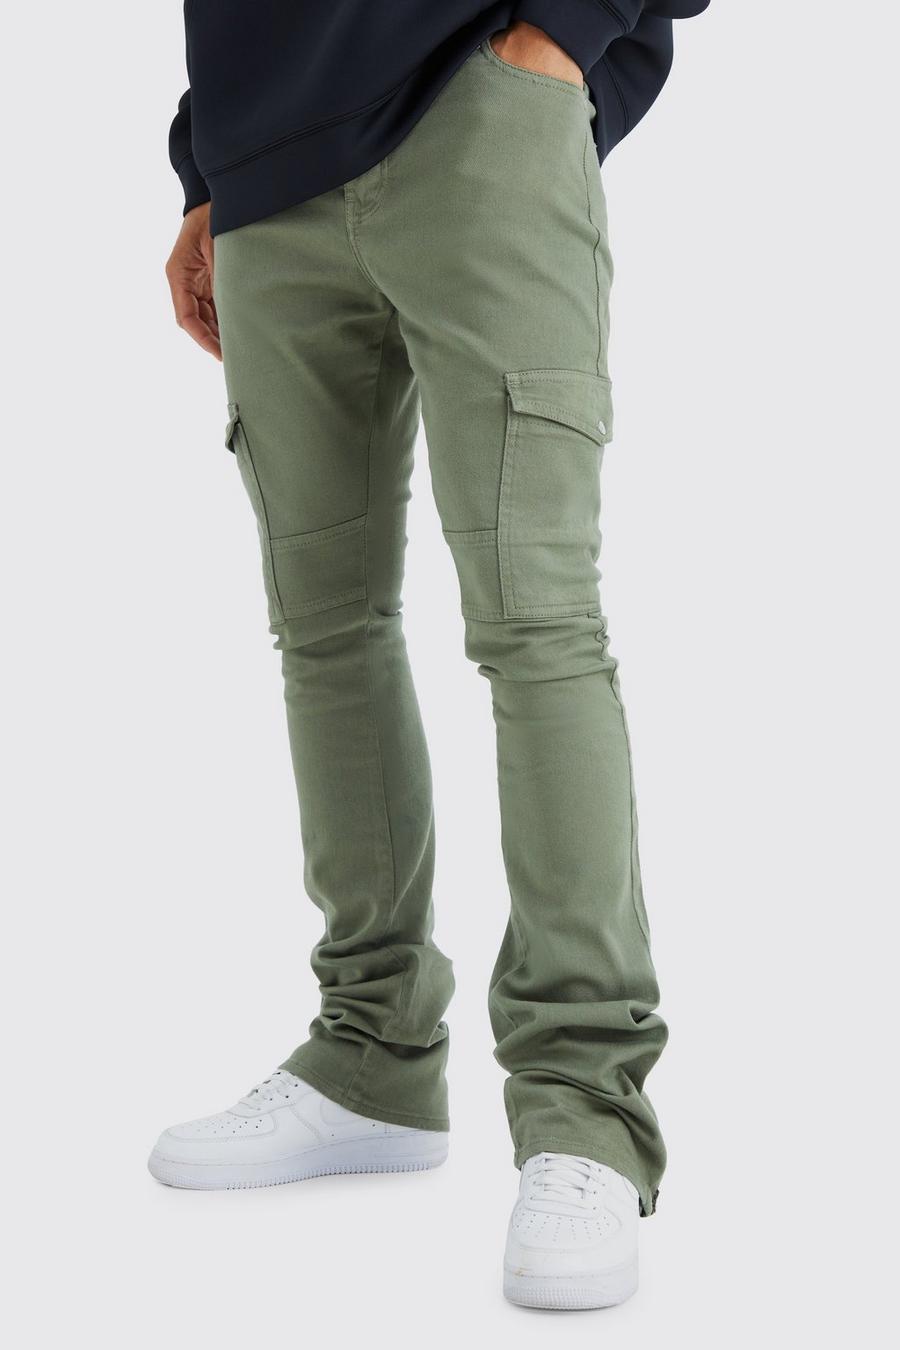 Olive Tall Fixed Waist Skinny Stacked Zip Gusset Cargo Pants image number 1